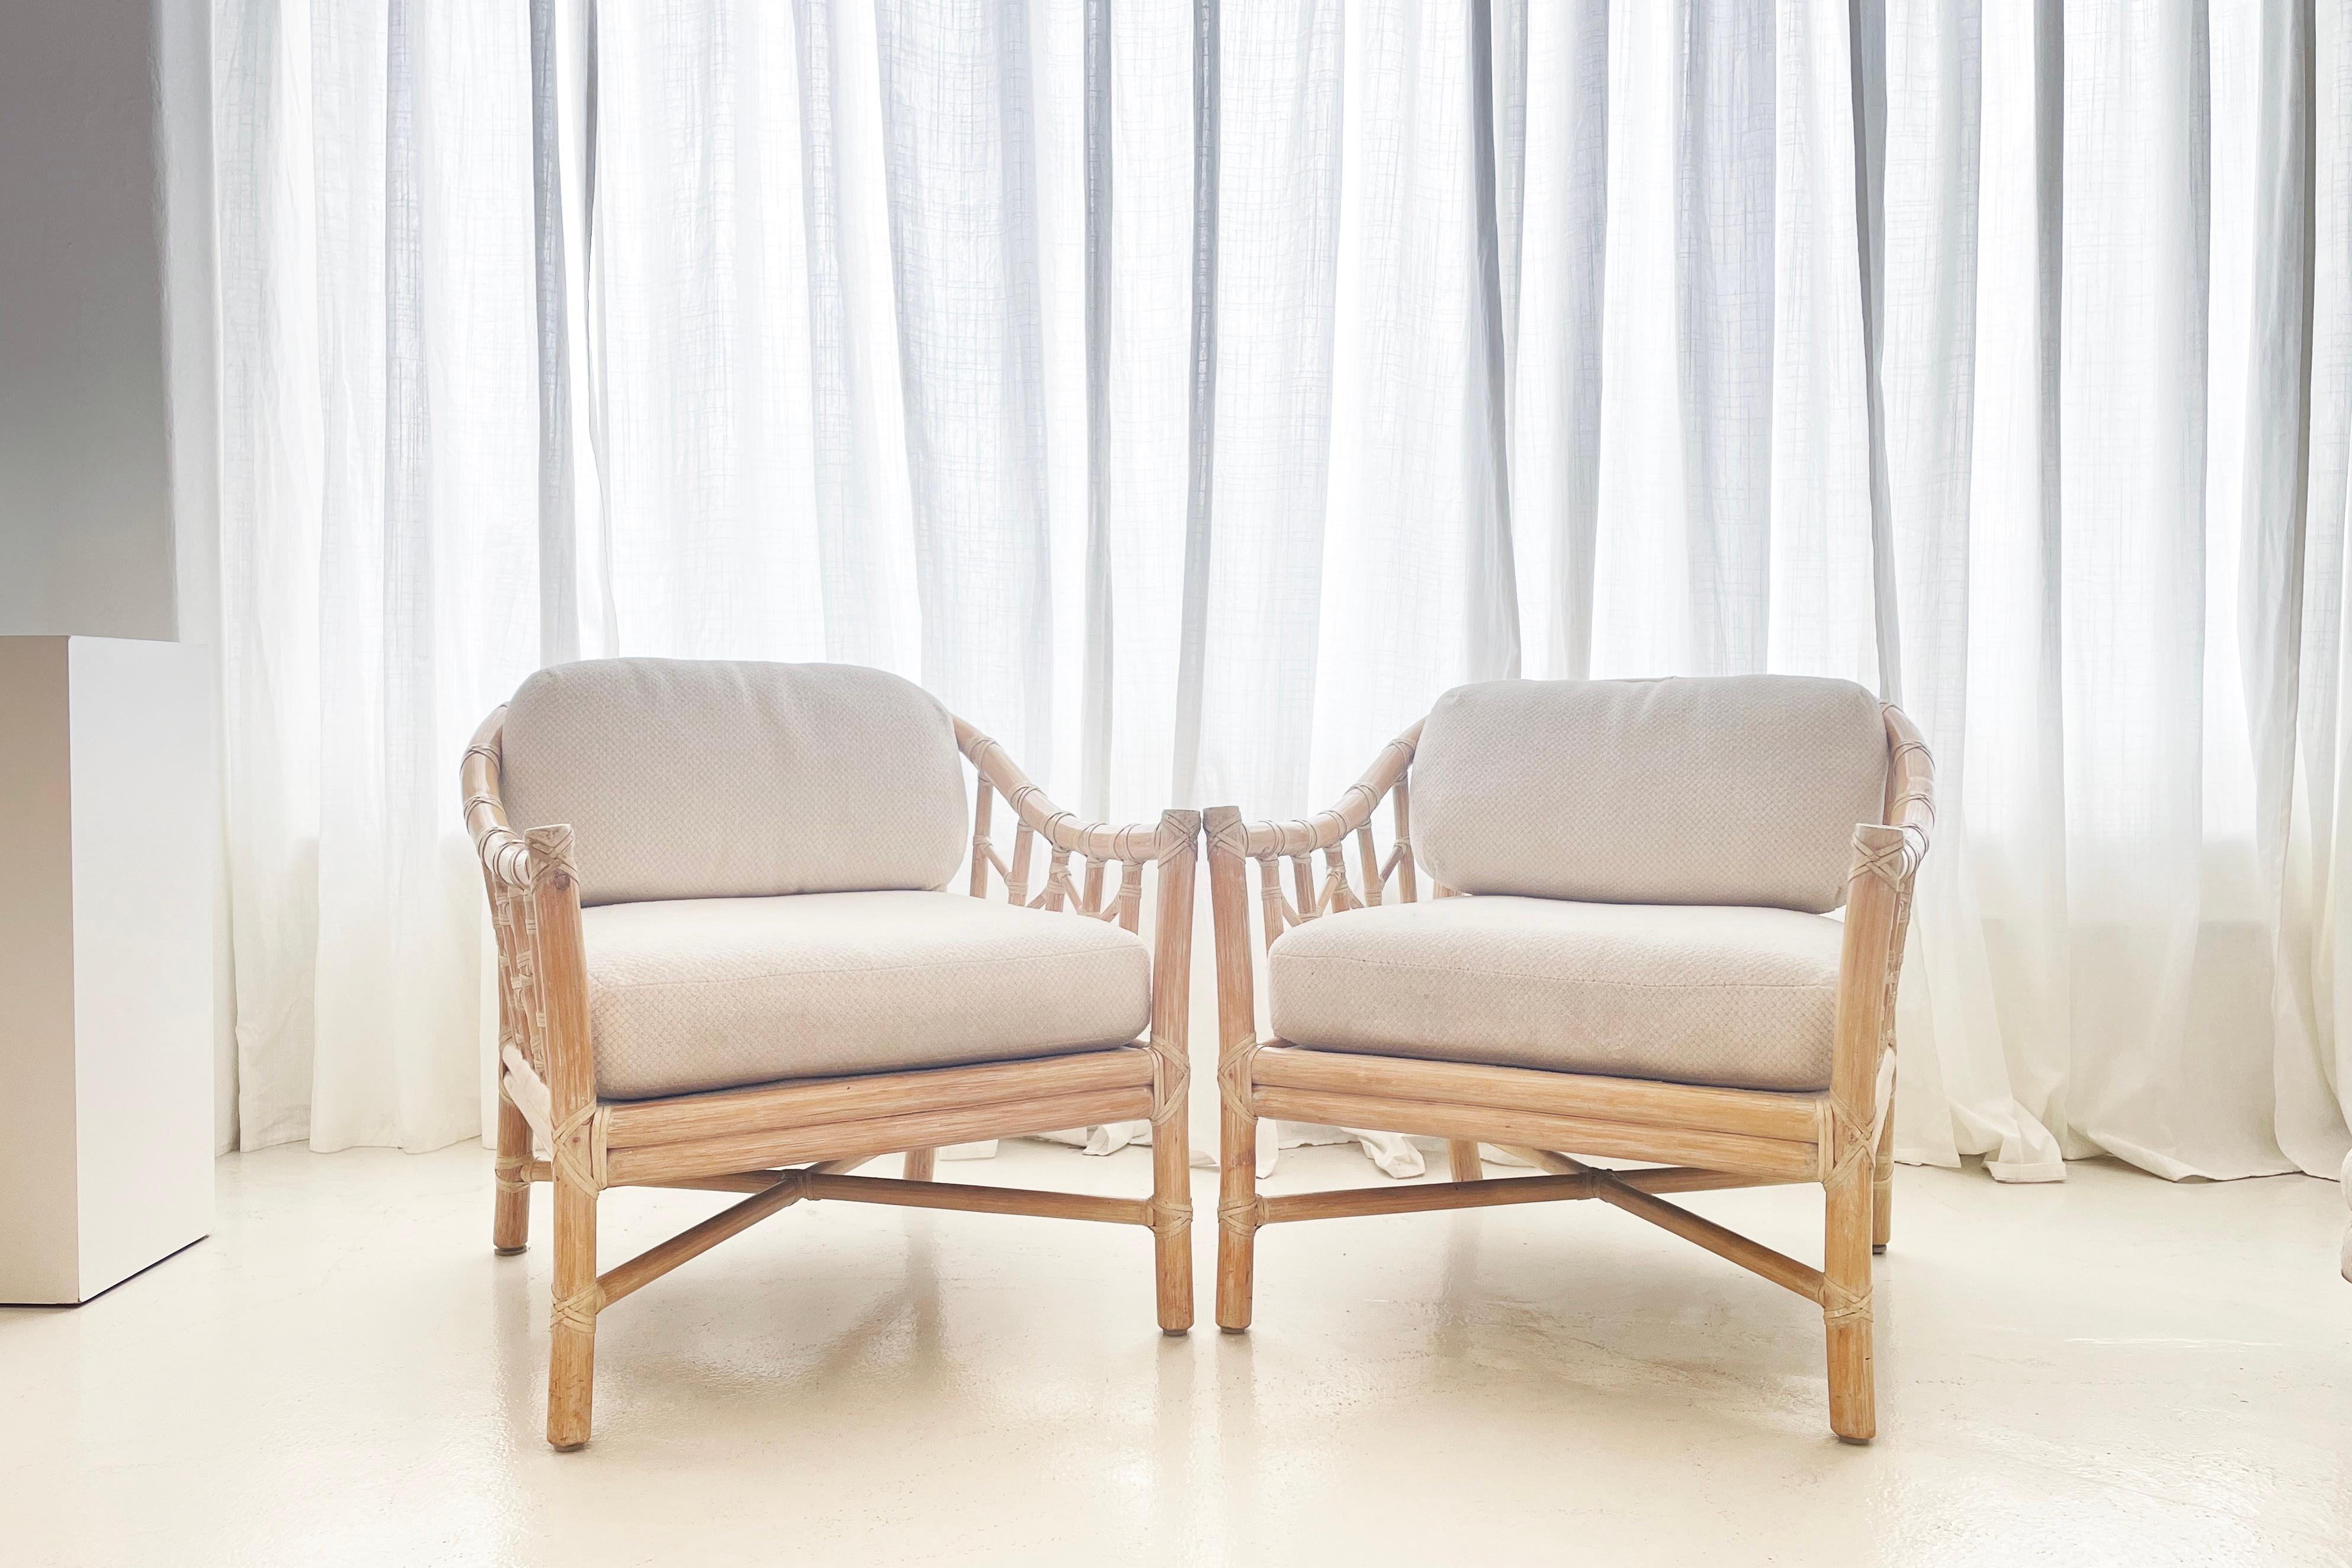 Founded in 1948, the McGuire Furniture Company is an American manufacturer of top quality furnishings crafted from natural materials.

This set is an original pair of midcentury armchairs with original placards by McGuire.

Constructed from solid